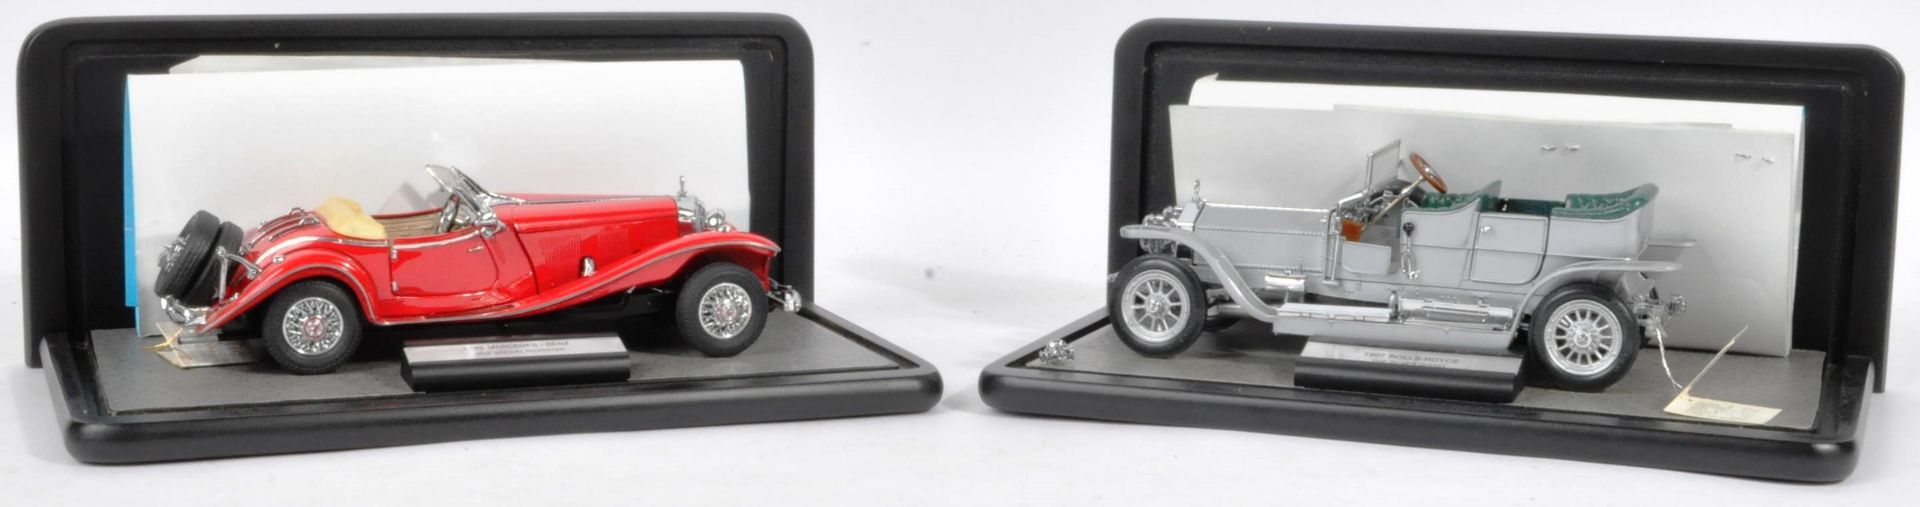 TWO FRANKLIN MINT 1/24 SCALE PRECISION DIECAST MODELS